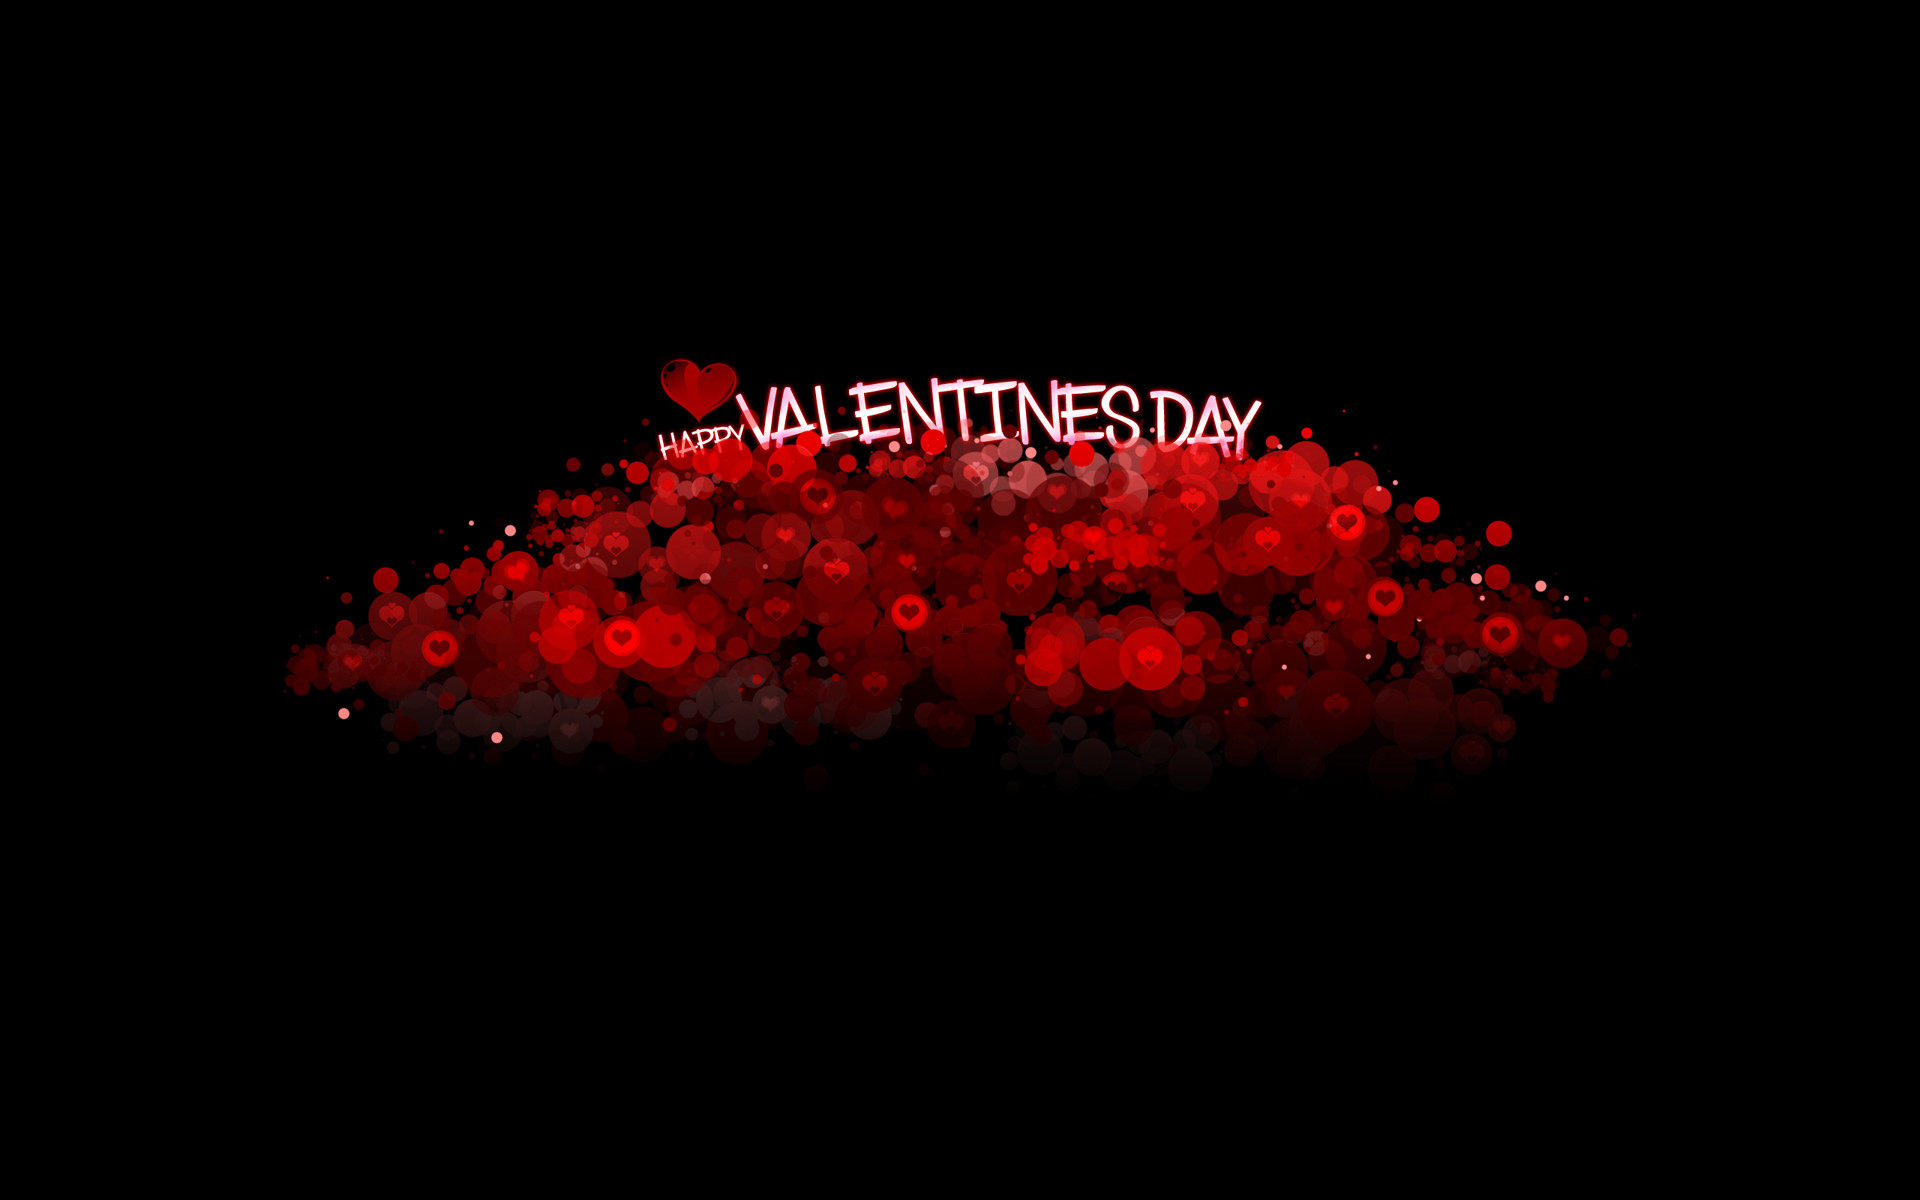 Valentines day wallpapers high quality download free